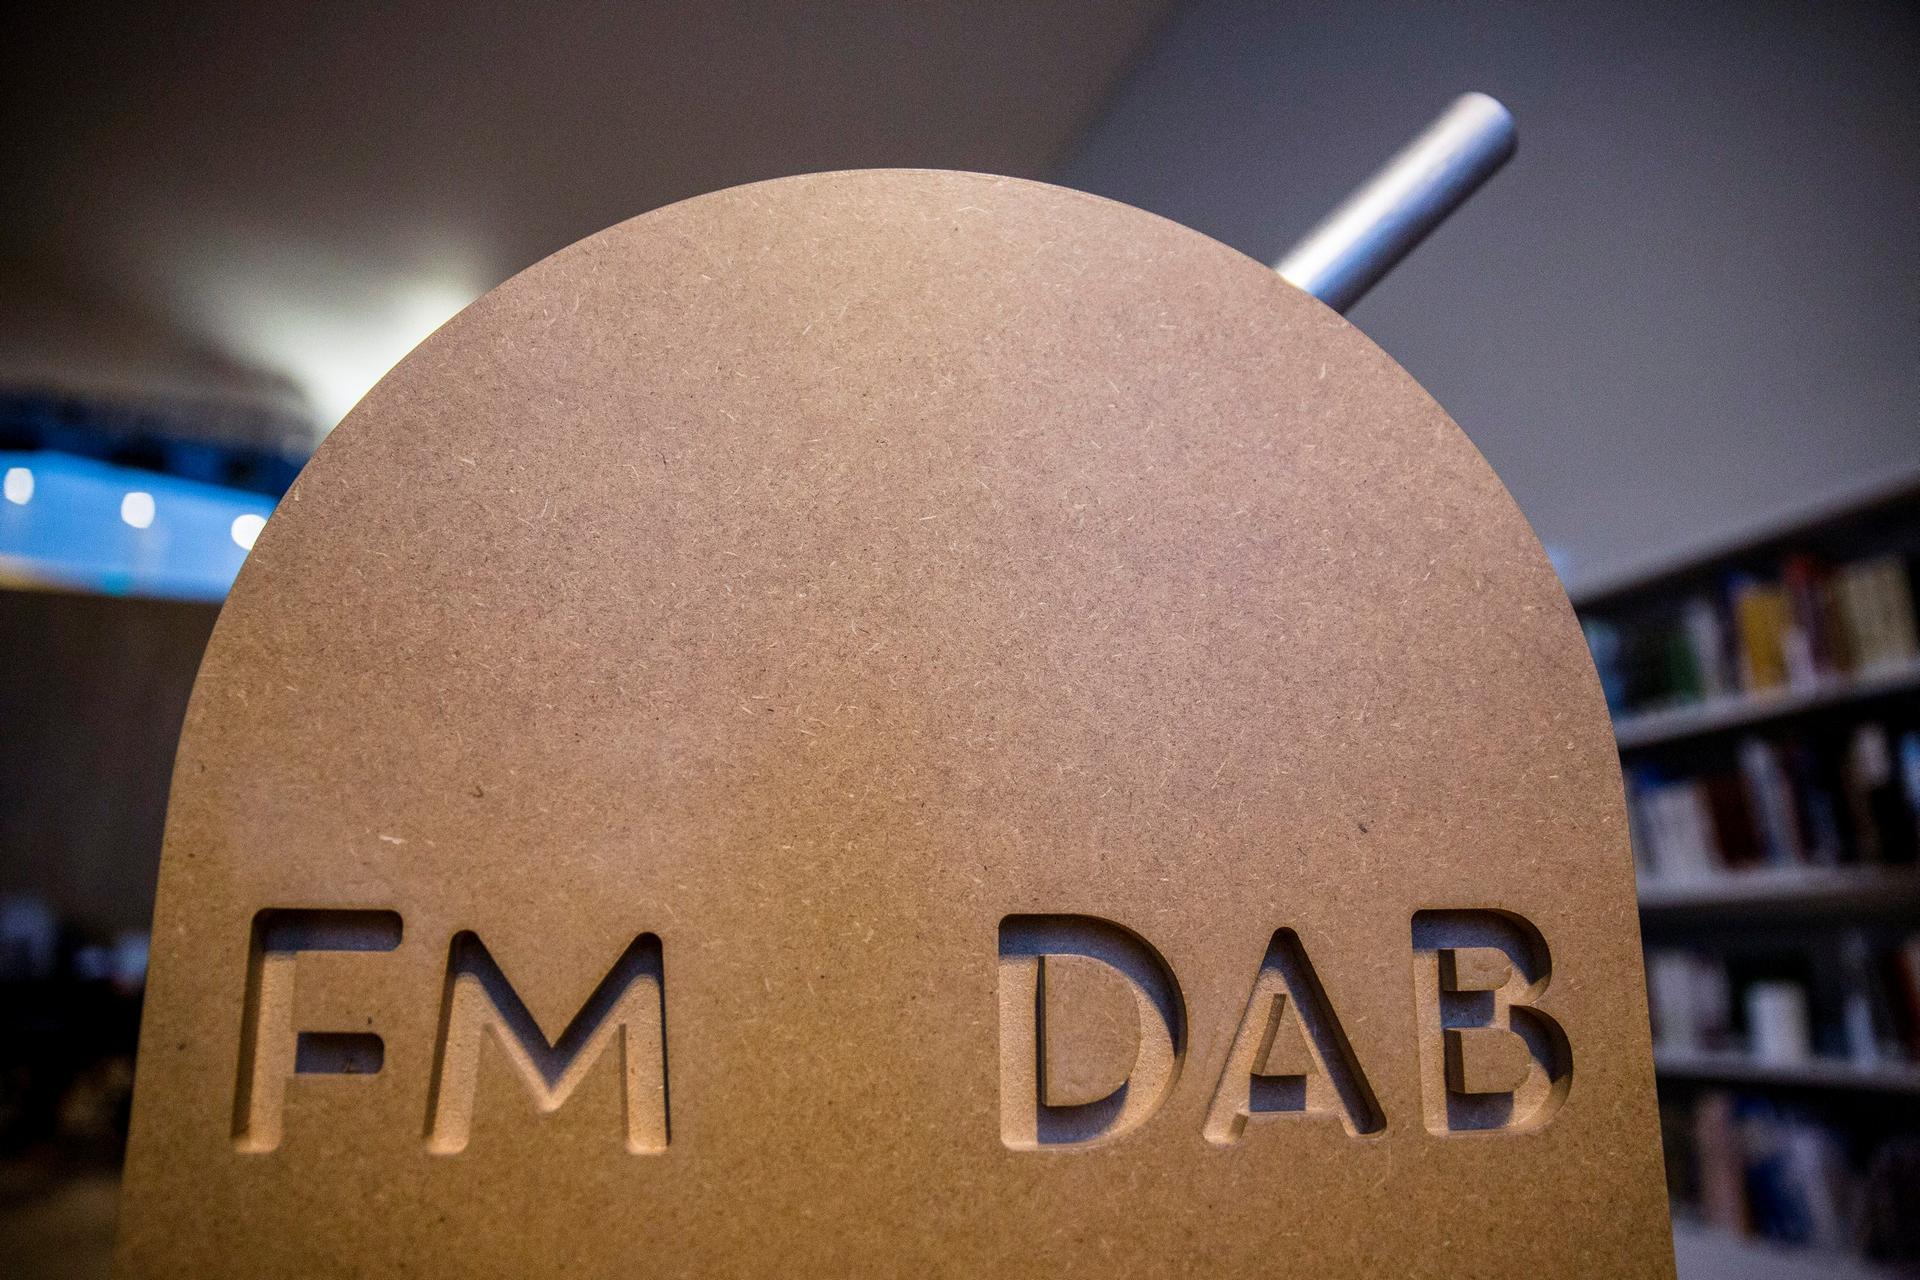 A switch is seen at a ceremony where the northern part of Norway's FM radio network was shut down in favor of digital radio or DAB